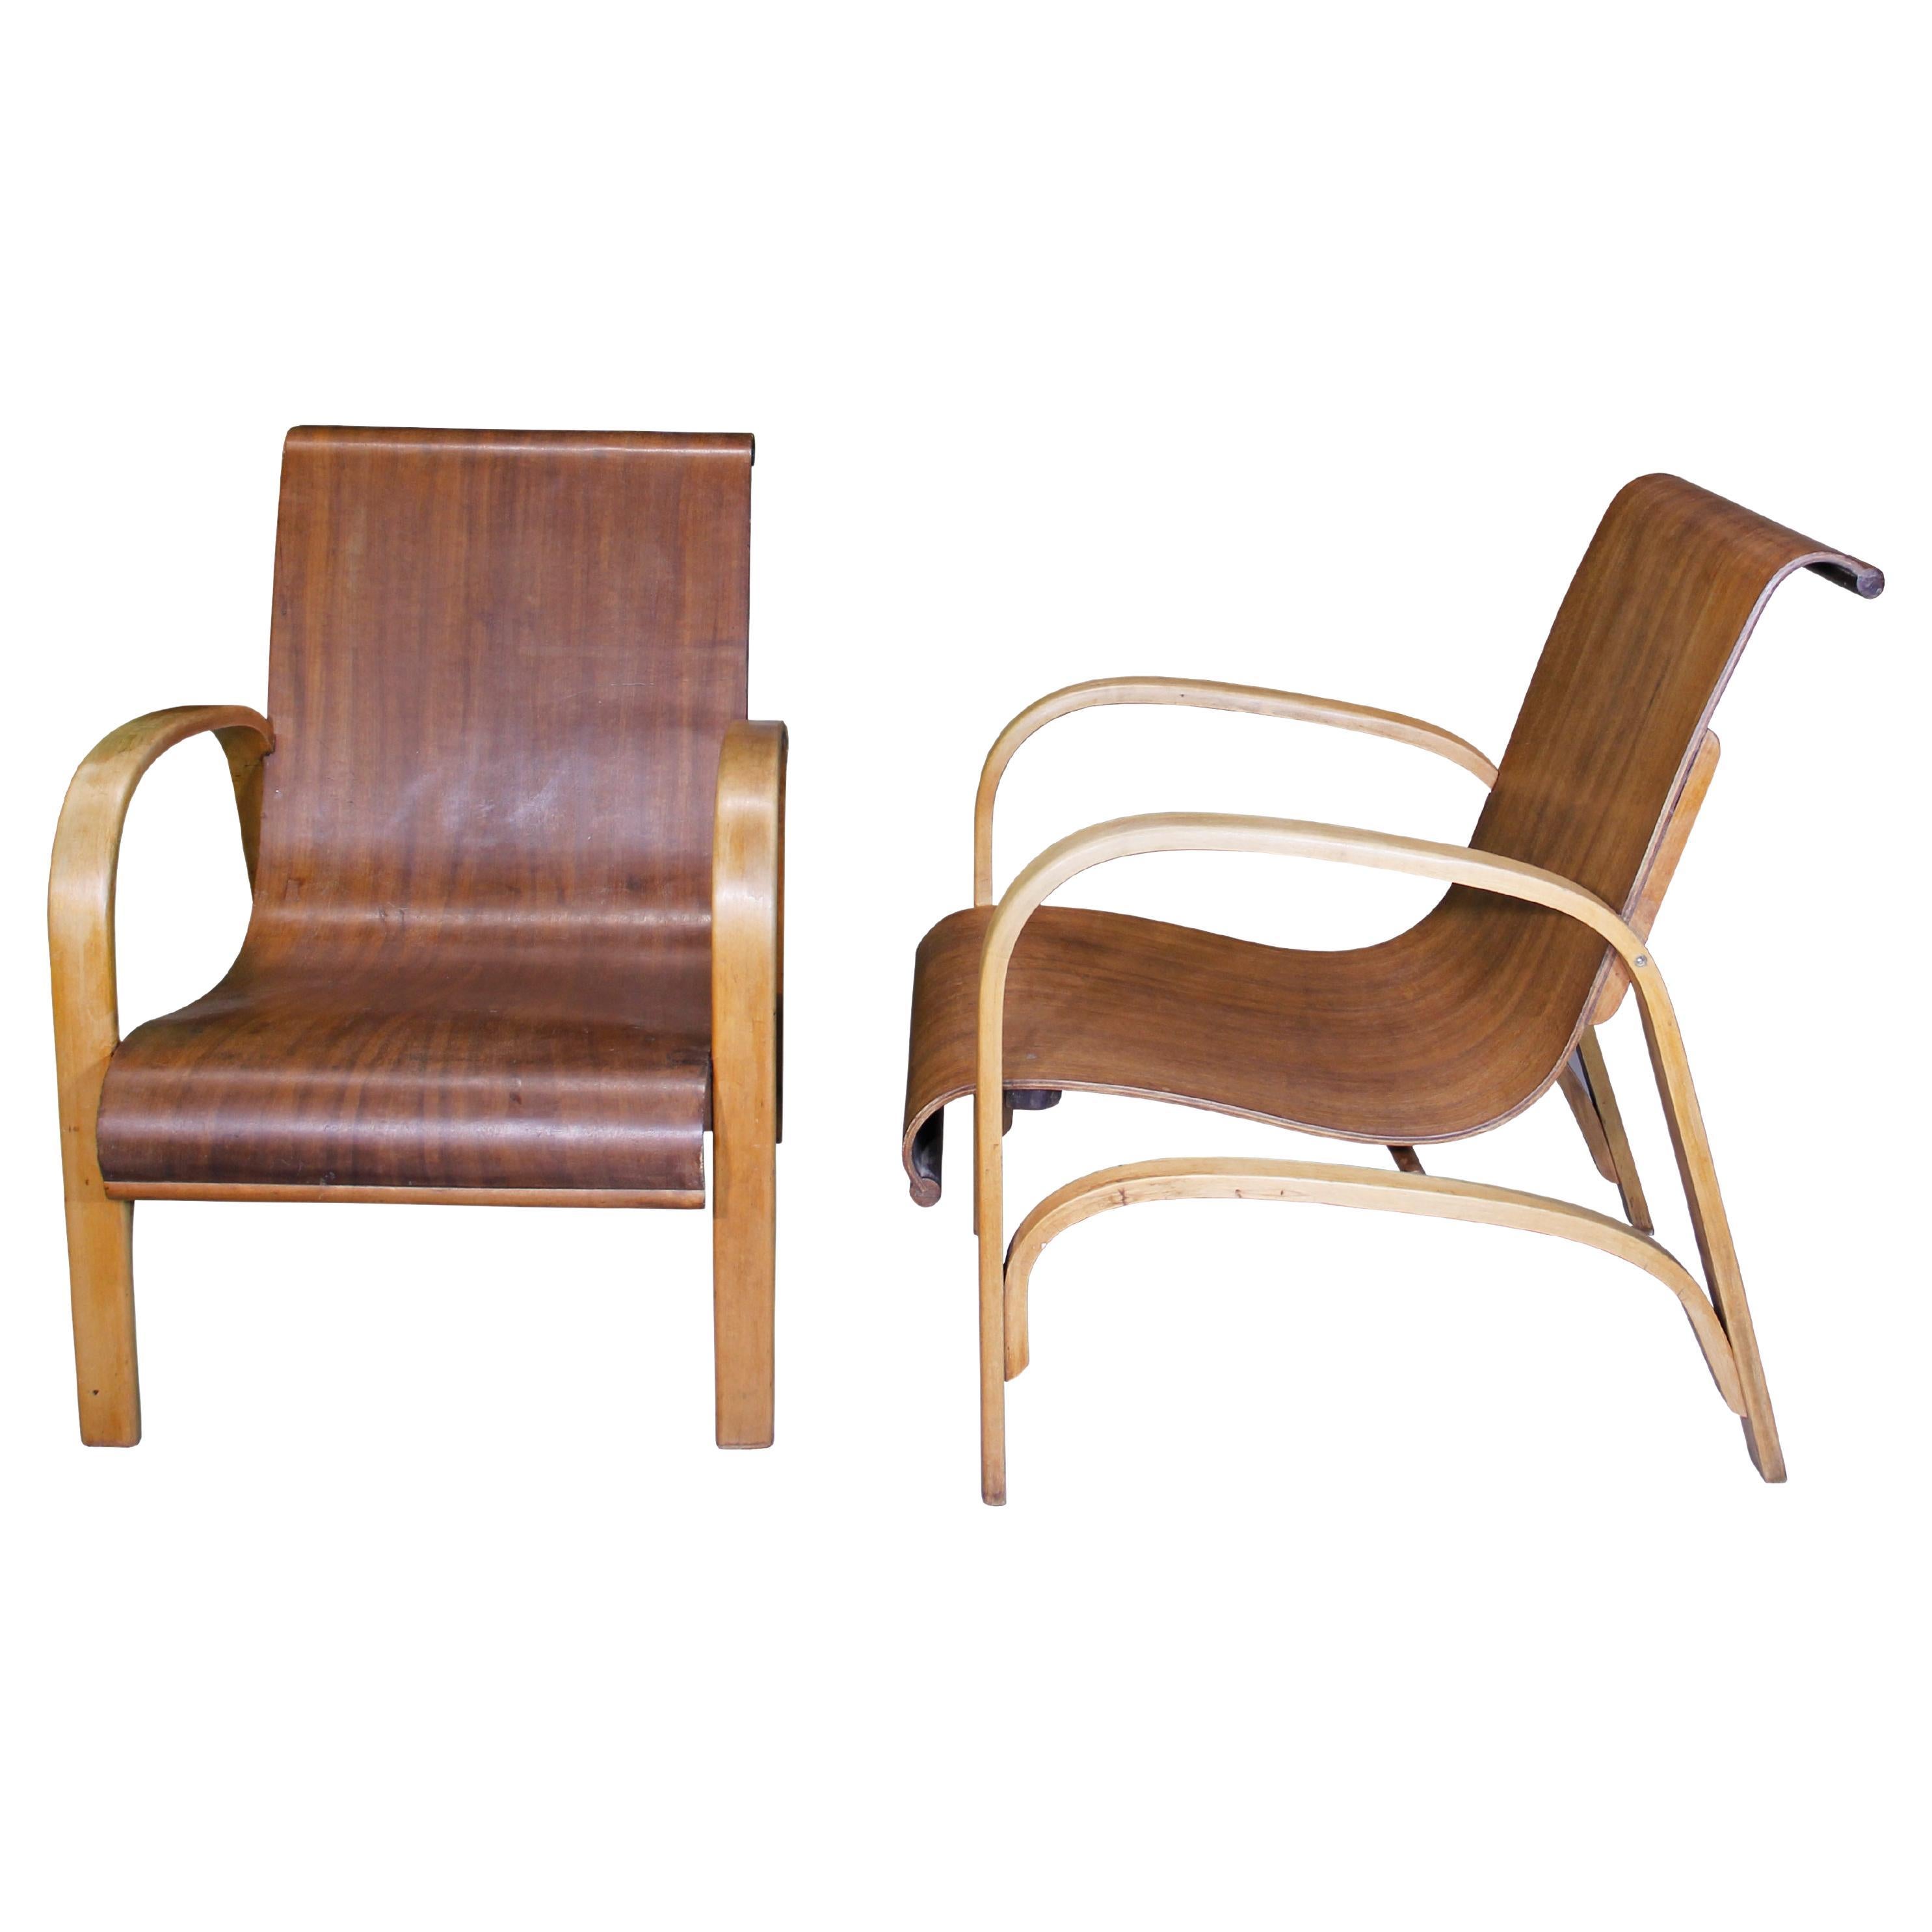 Rare Pair of Curved Ply Armchairs by "Moveis Cimo" Brazilian Imbuia